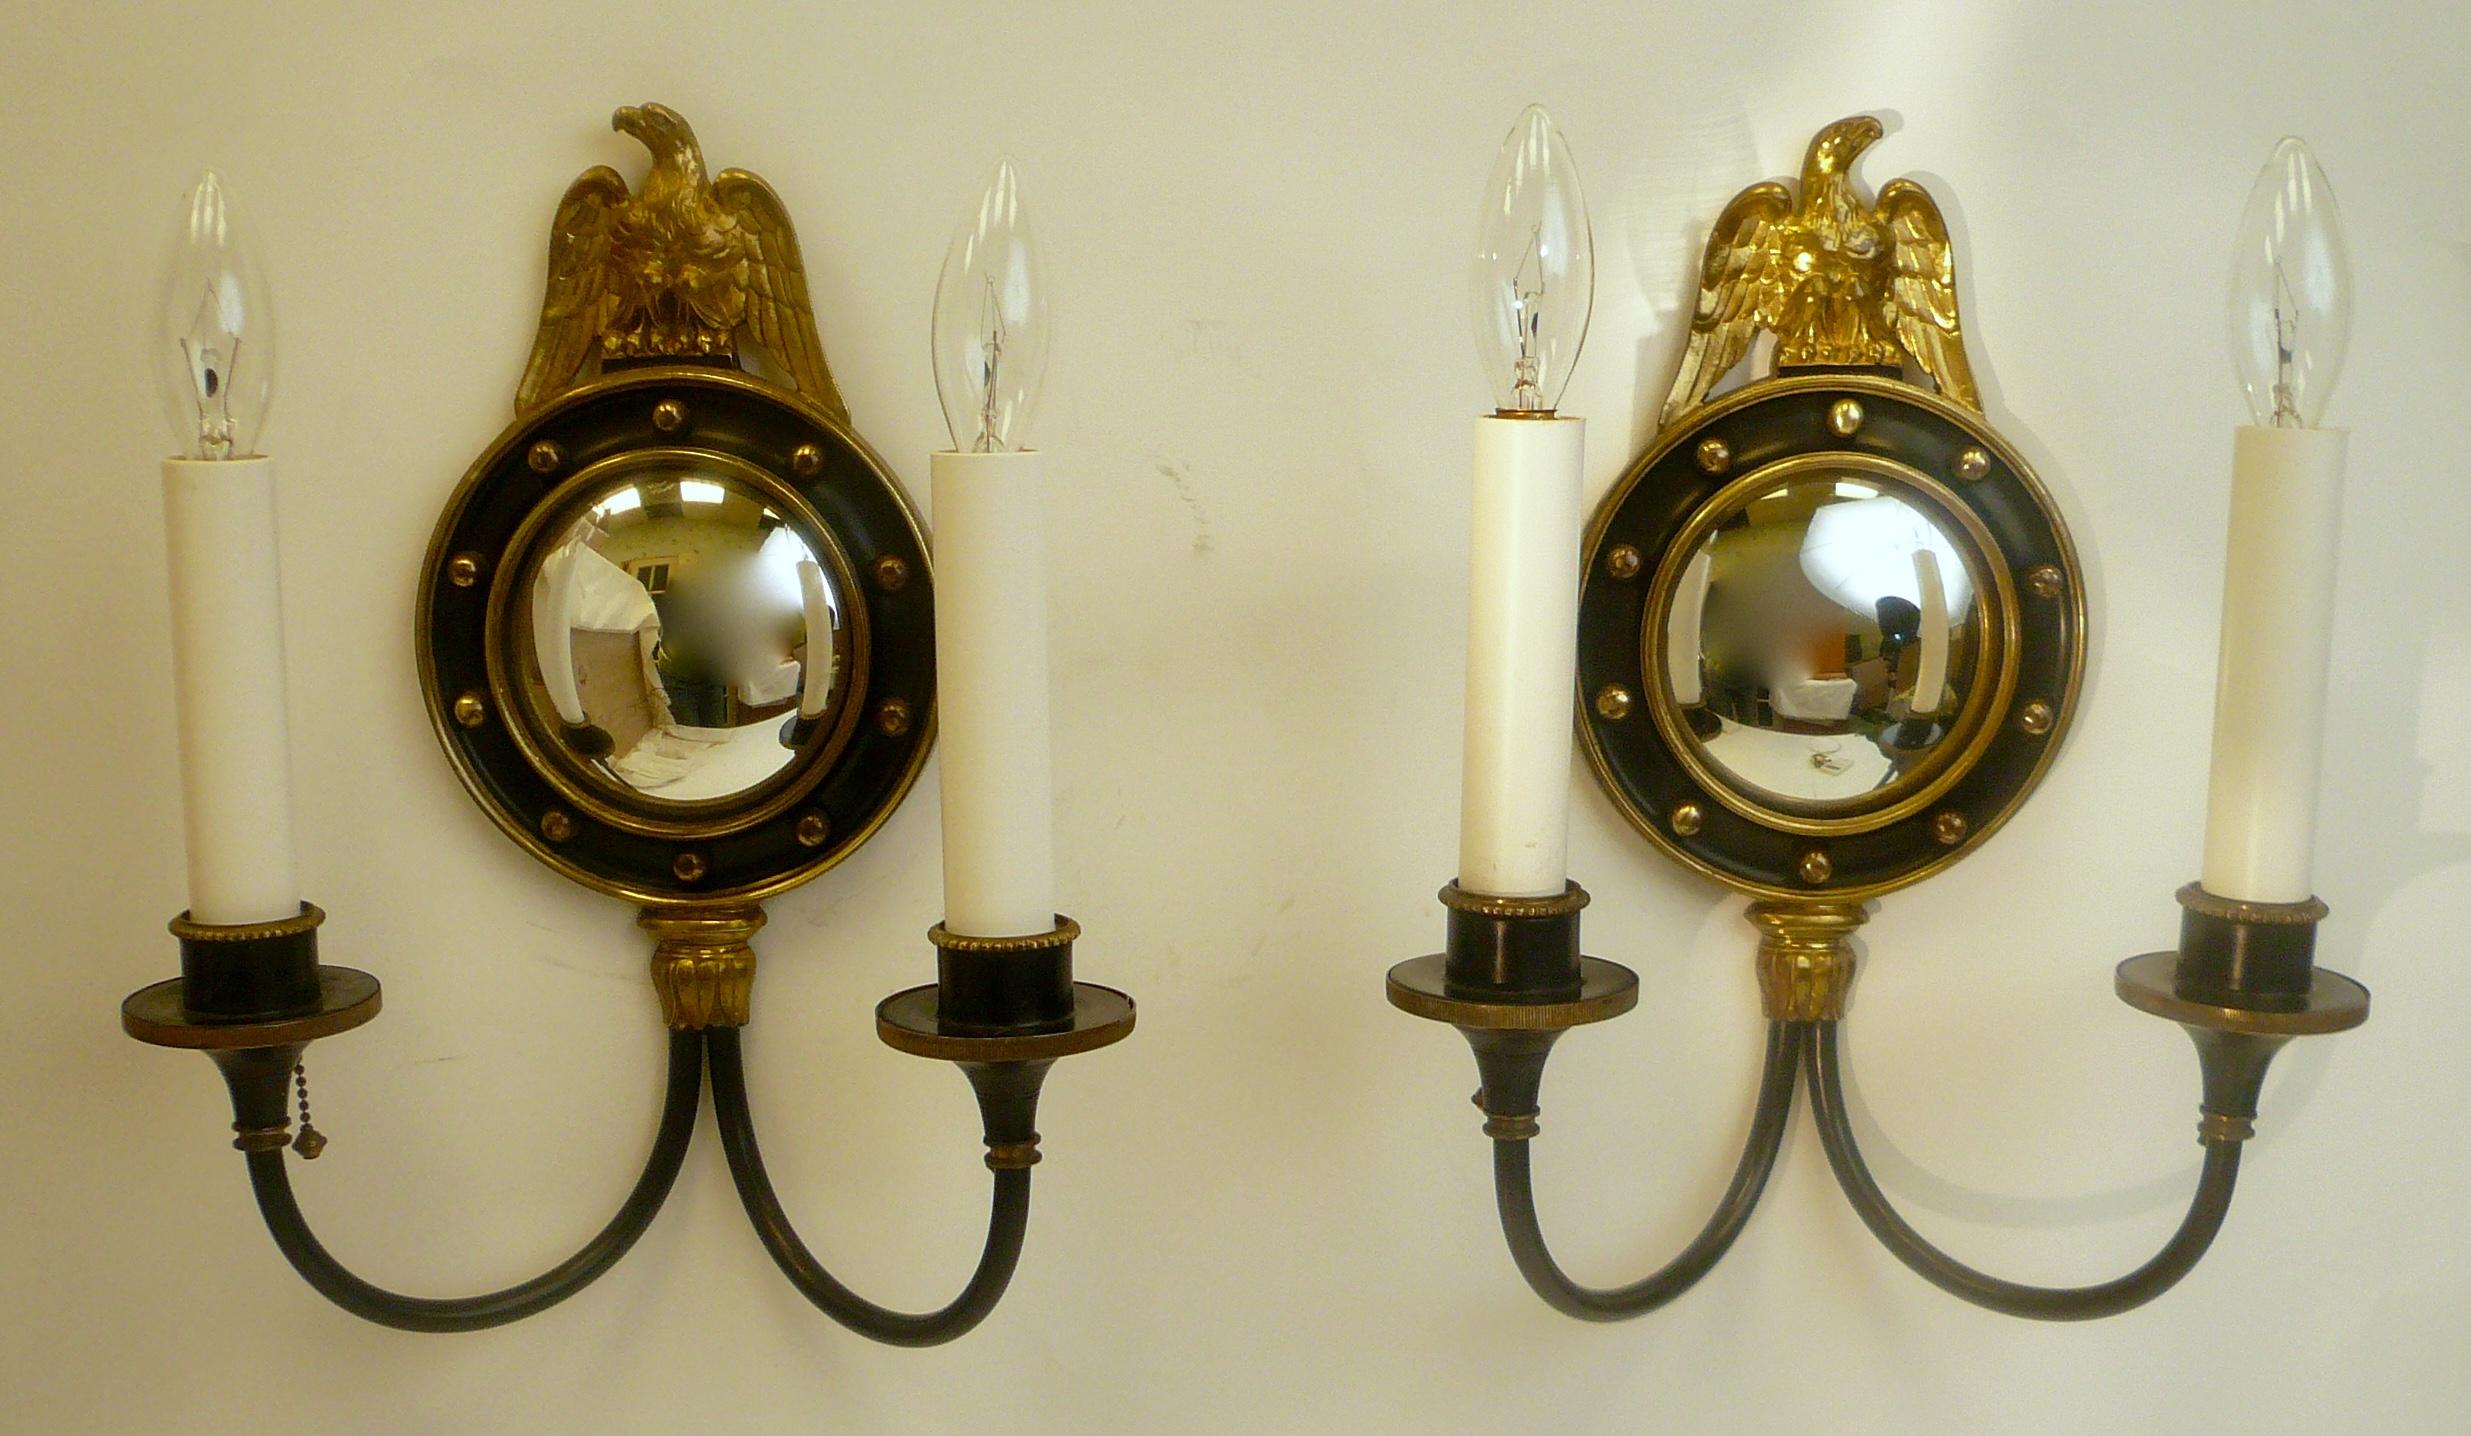 These quality sconces feature mirror image cast bronze eagles, and convex mirrors. They were purchased from the estate of Mrs. H J Heinz II.